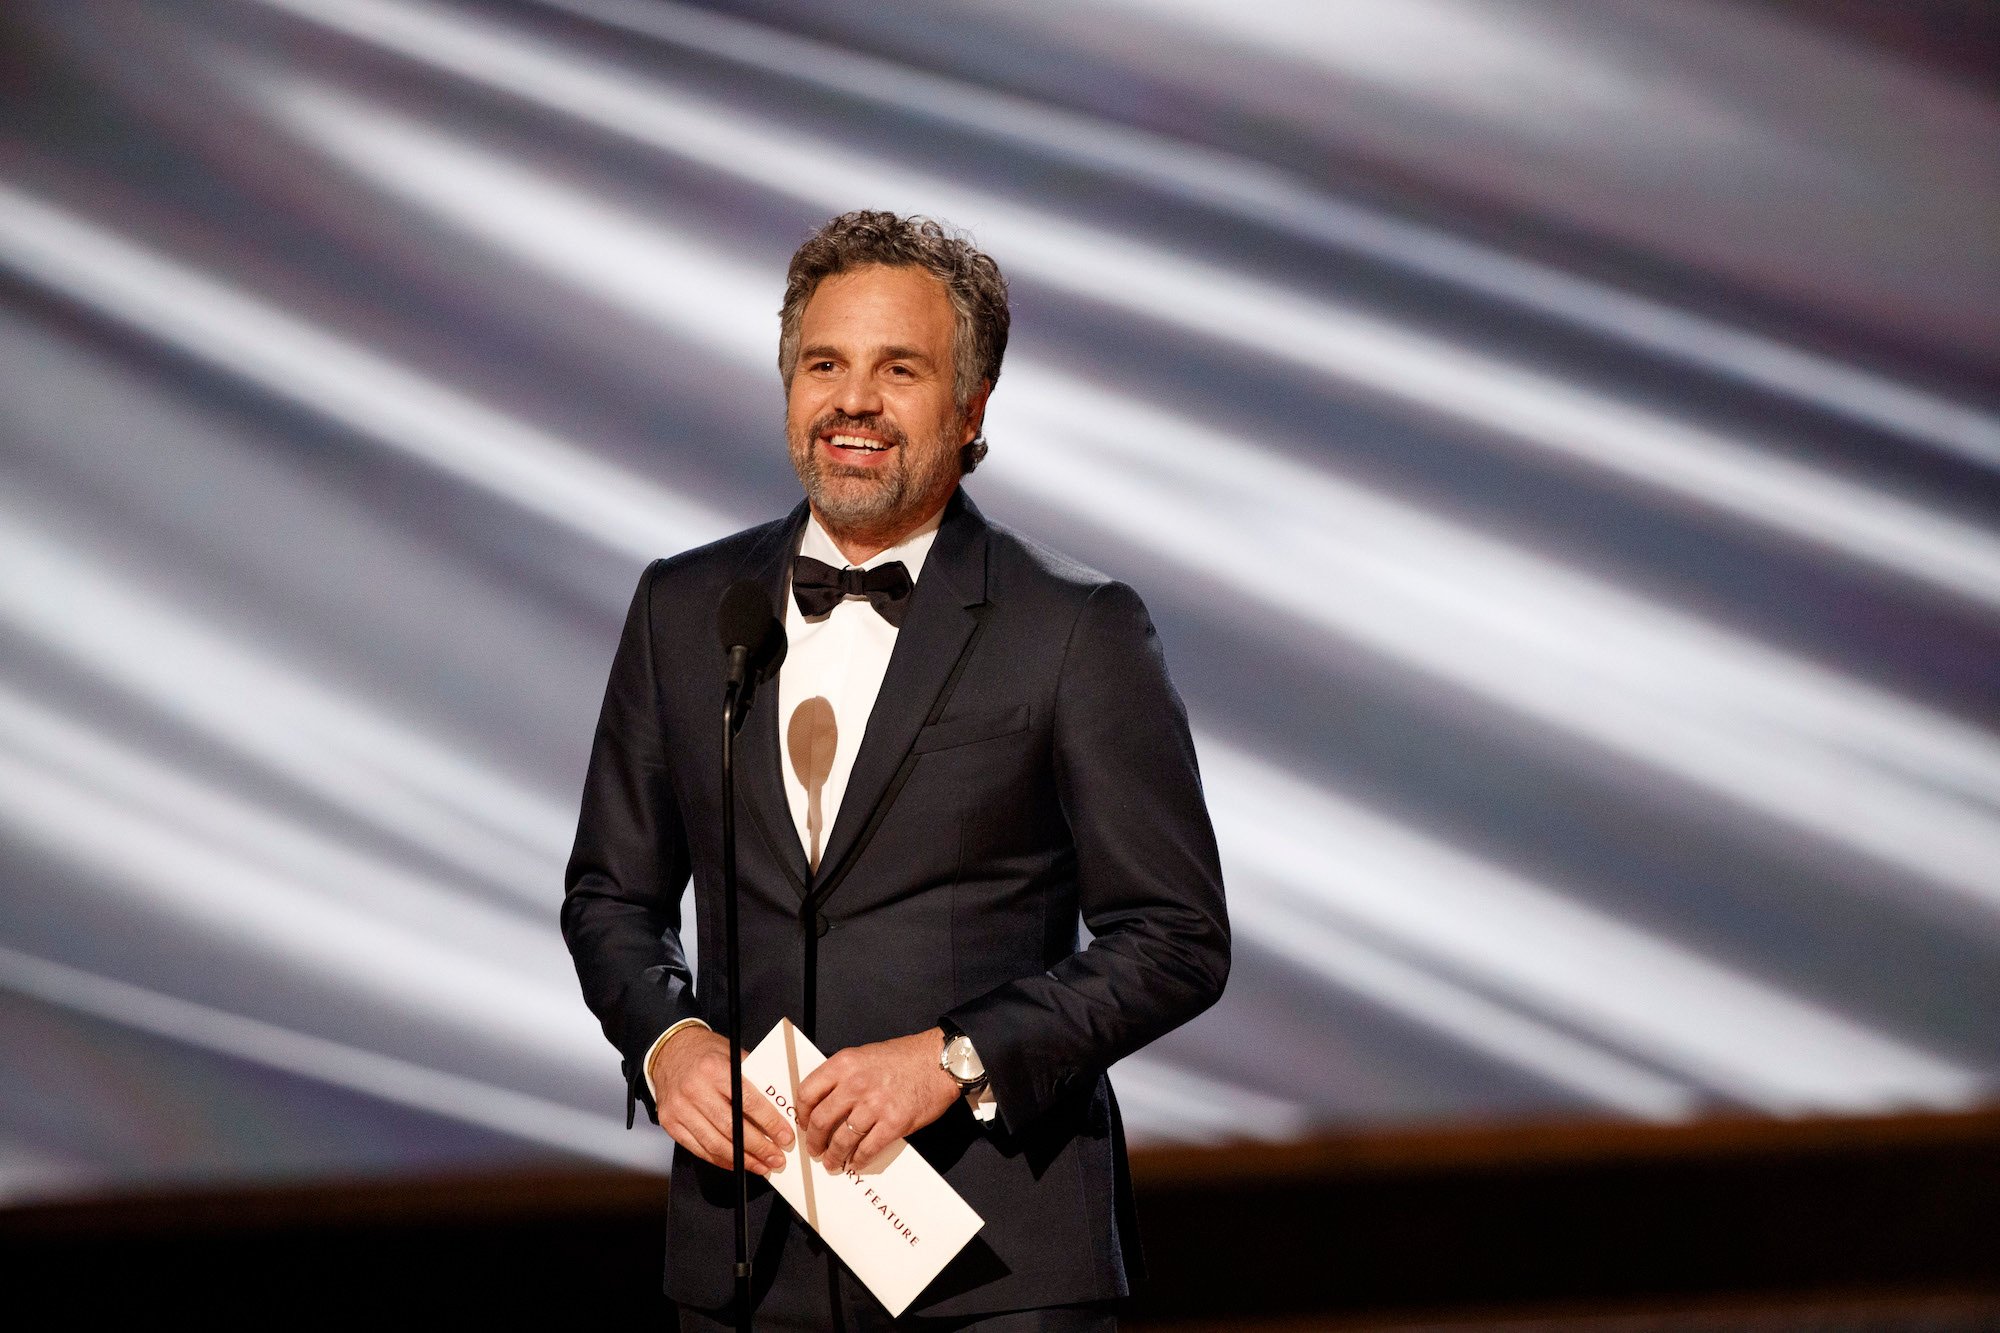 Mark Ruffalo smiling in front of a gray and white background